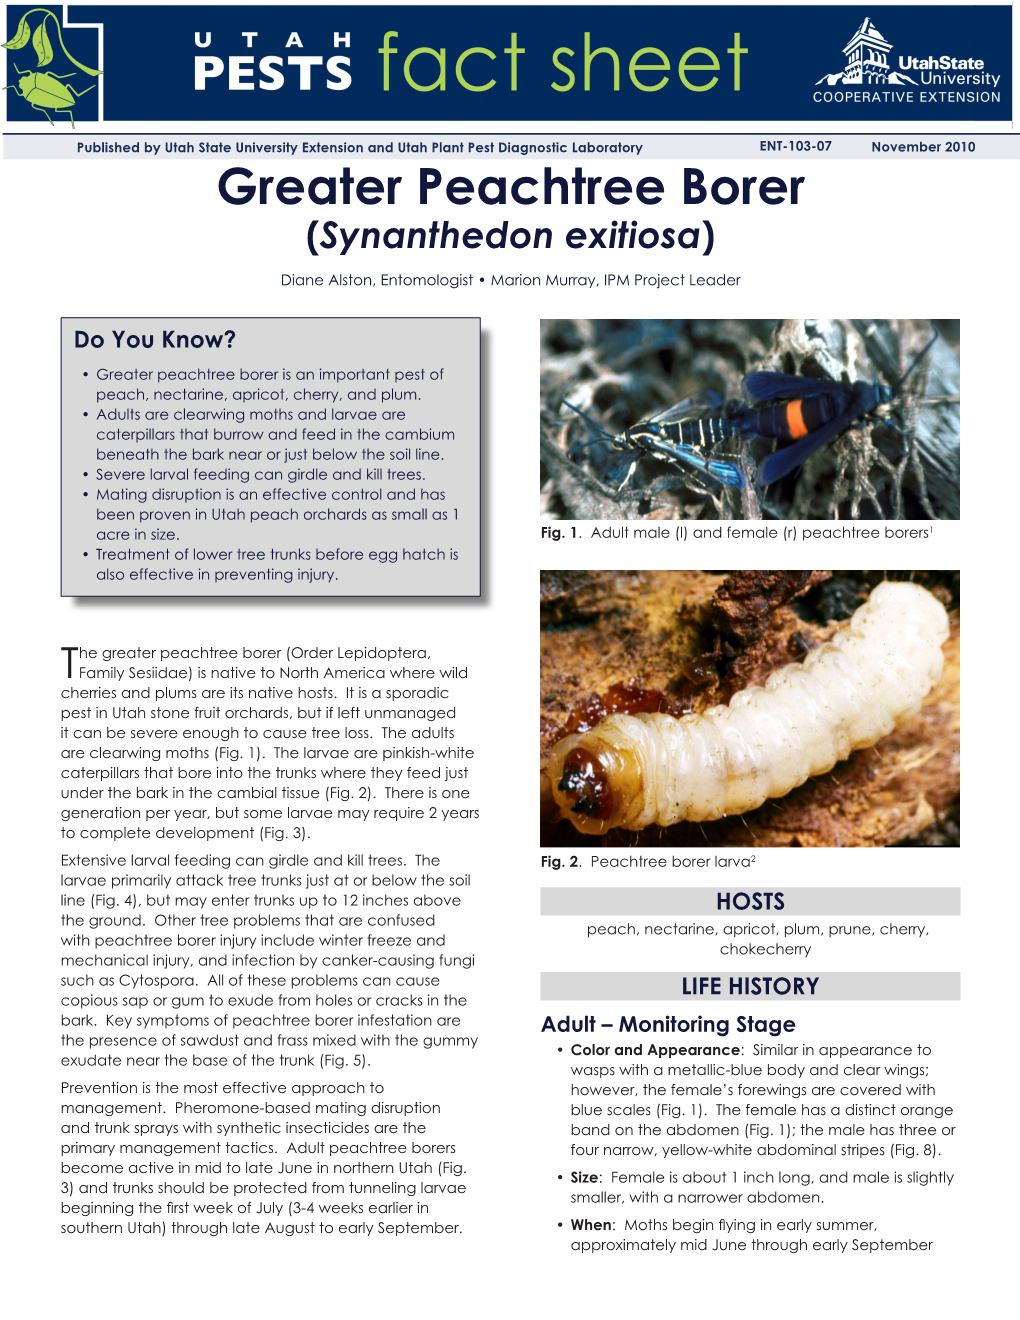 Greater Peachtree Borer (Synanthedon Exitiosa)